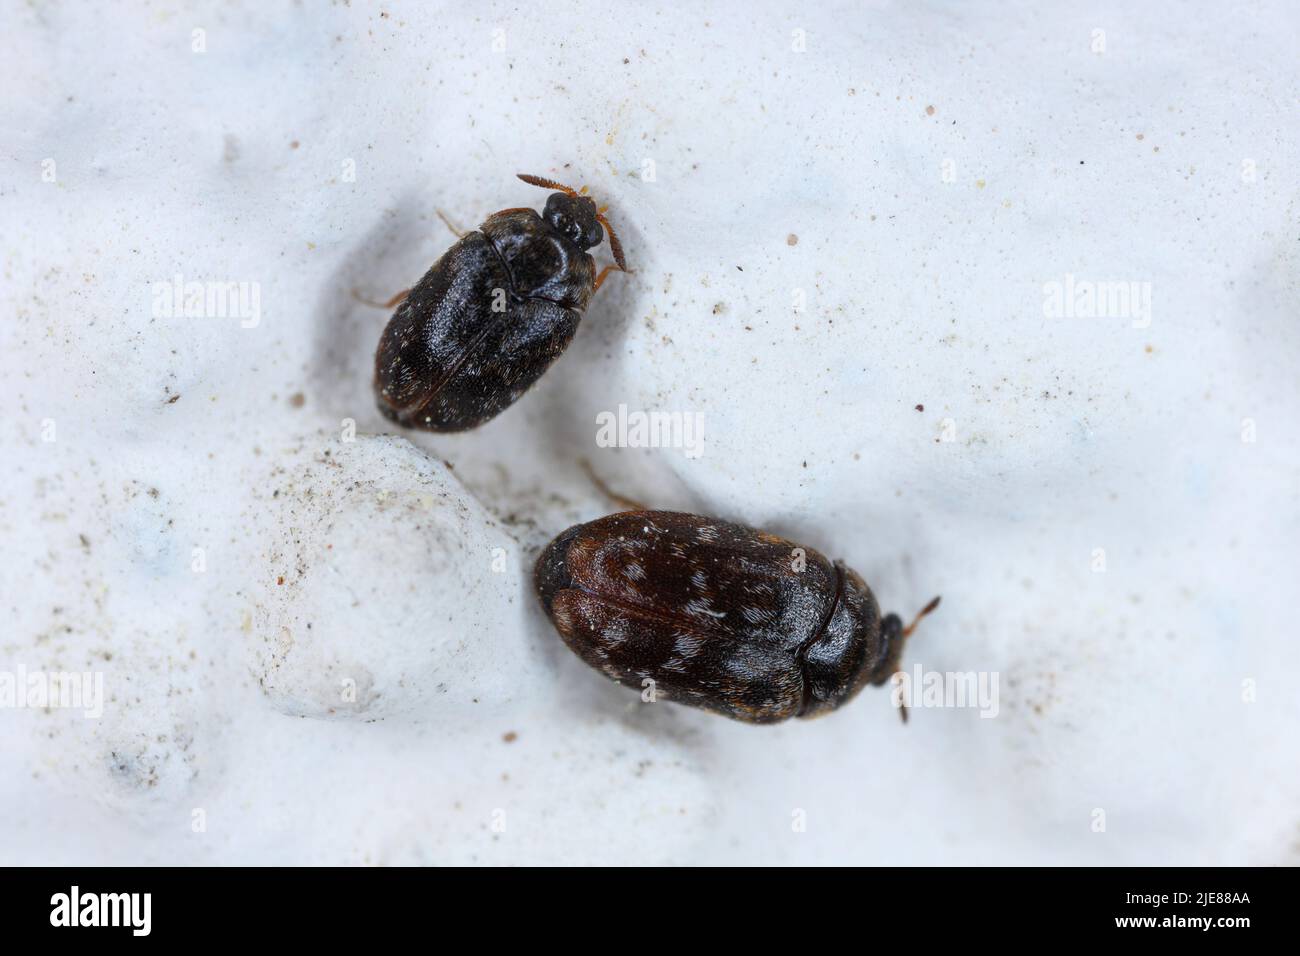 Beetles of the genus Trogoderma in the family Dermestidae, the skin beetles. It is a dangerous pest of stored animal and plant products. Stock Photo